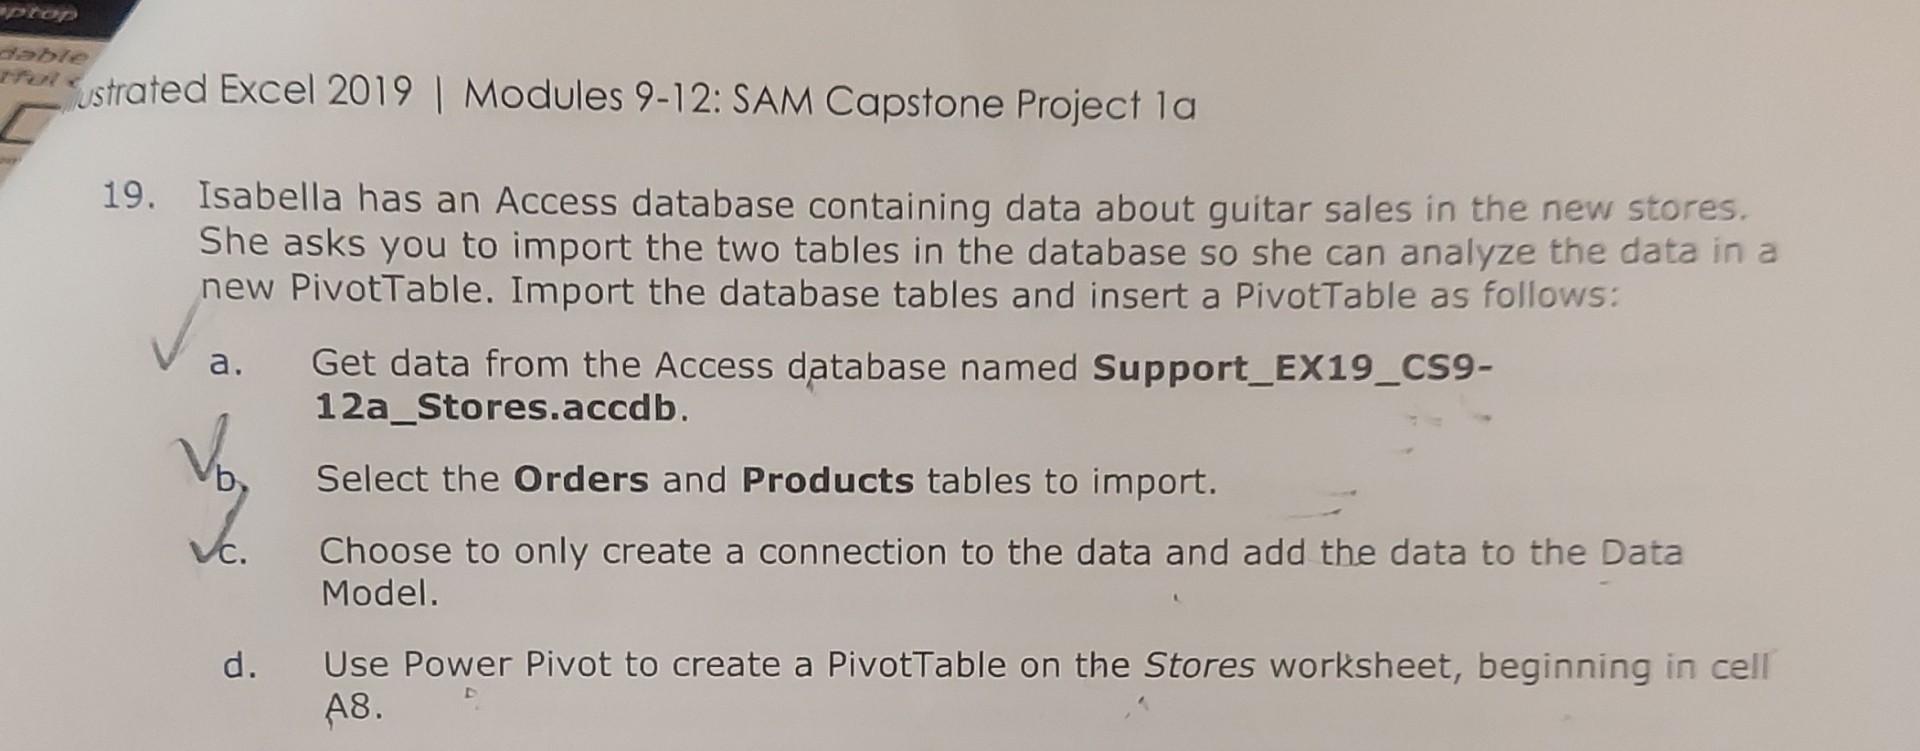 capstone project 3 excel modules 9 12